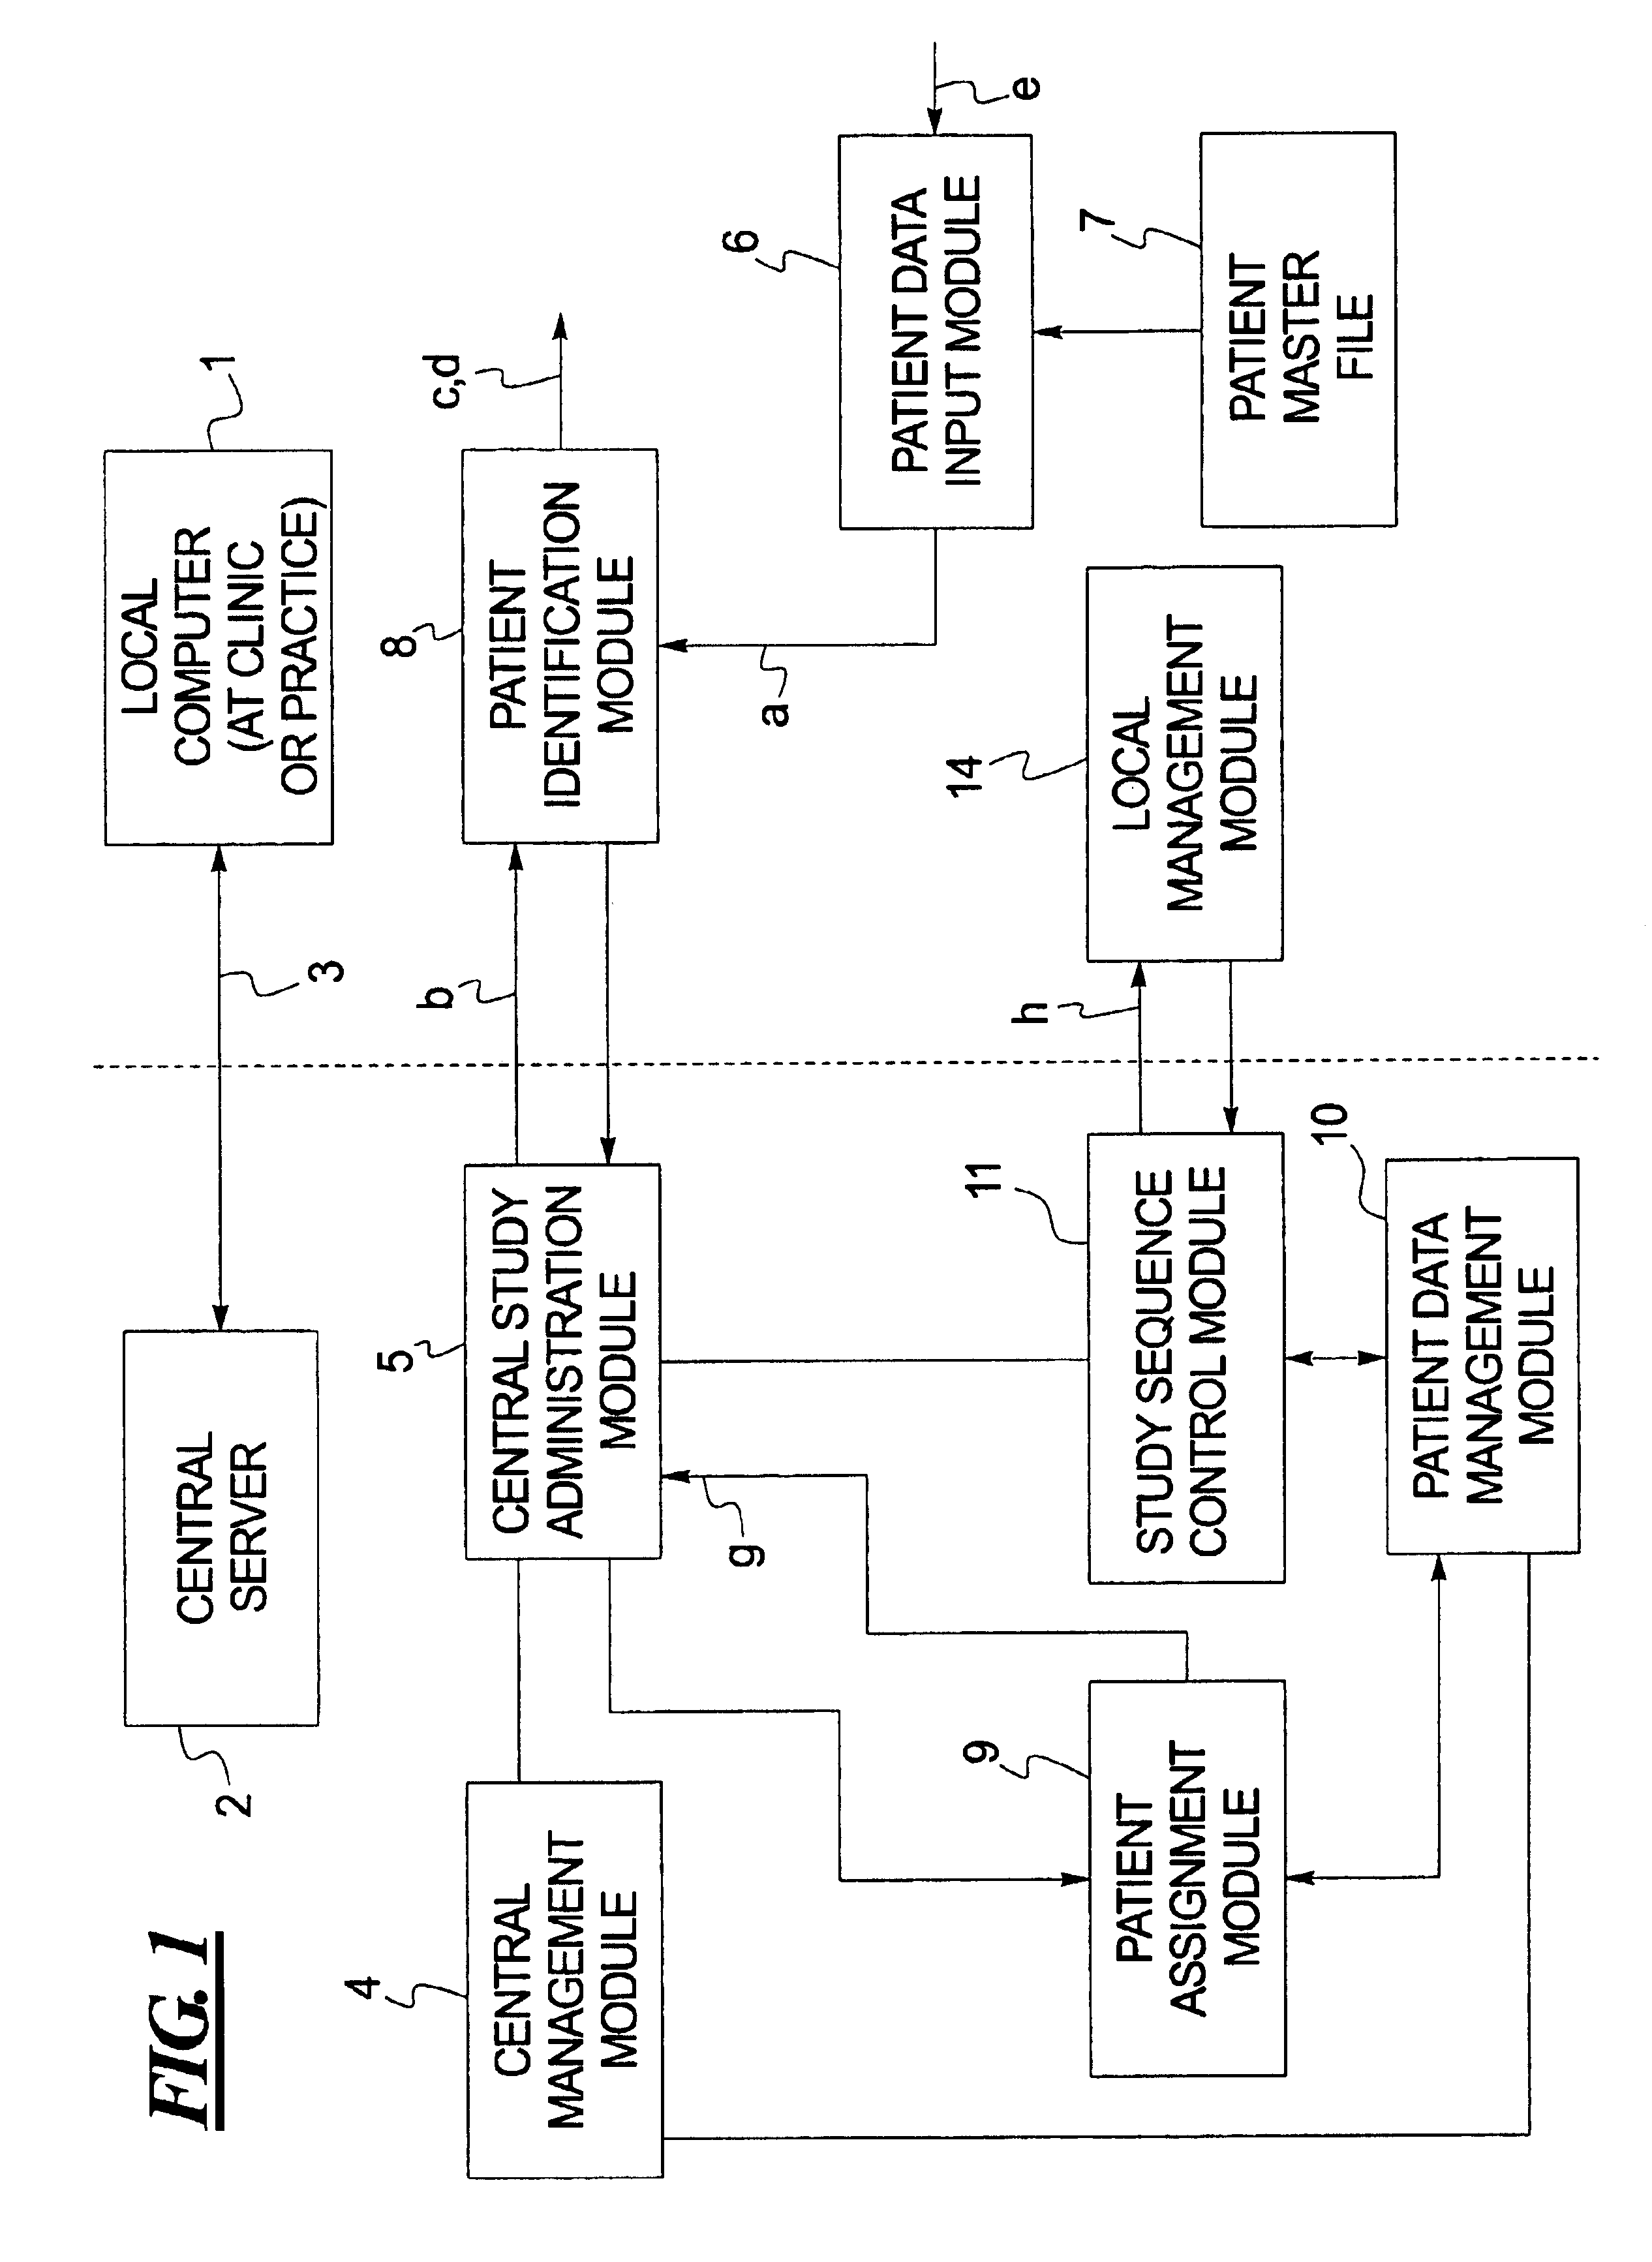 Computerized system for conducting medical studies